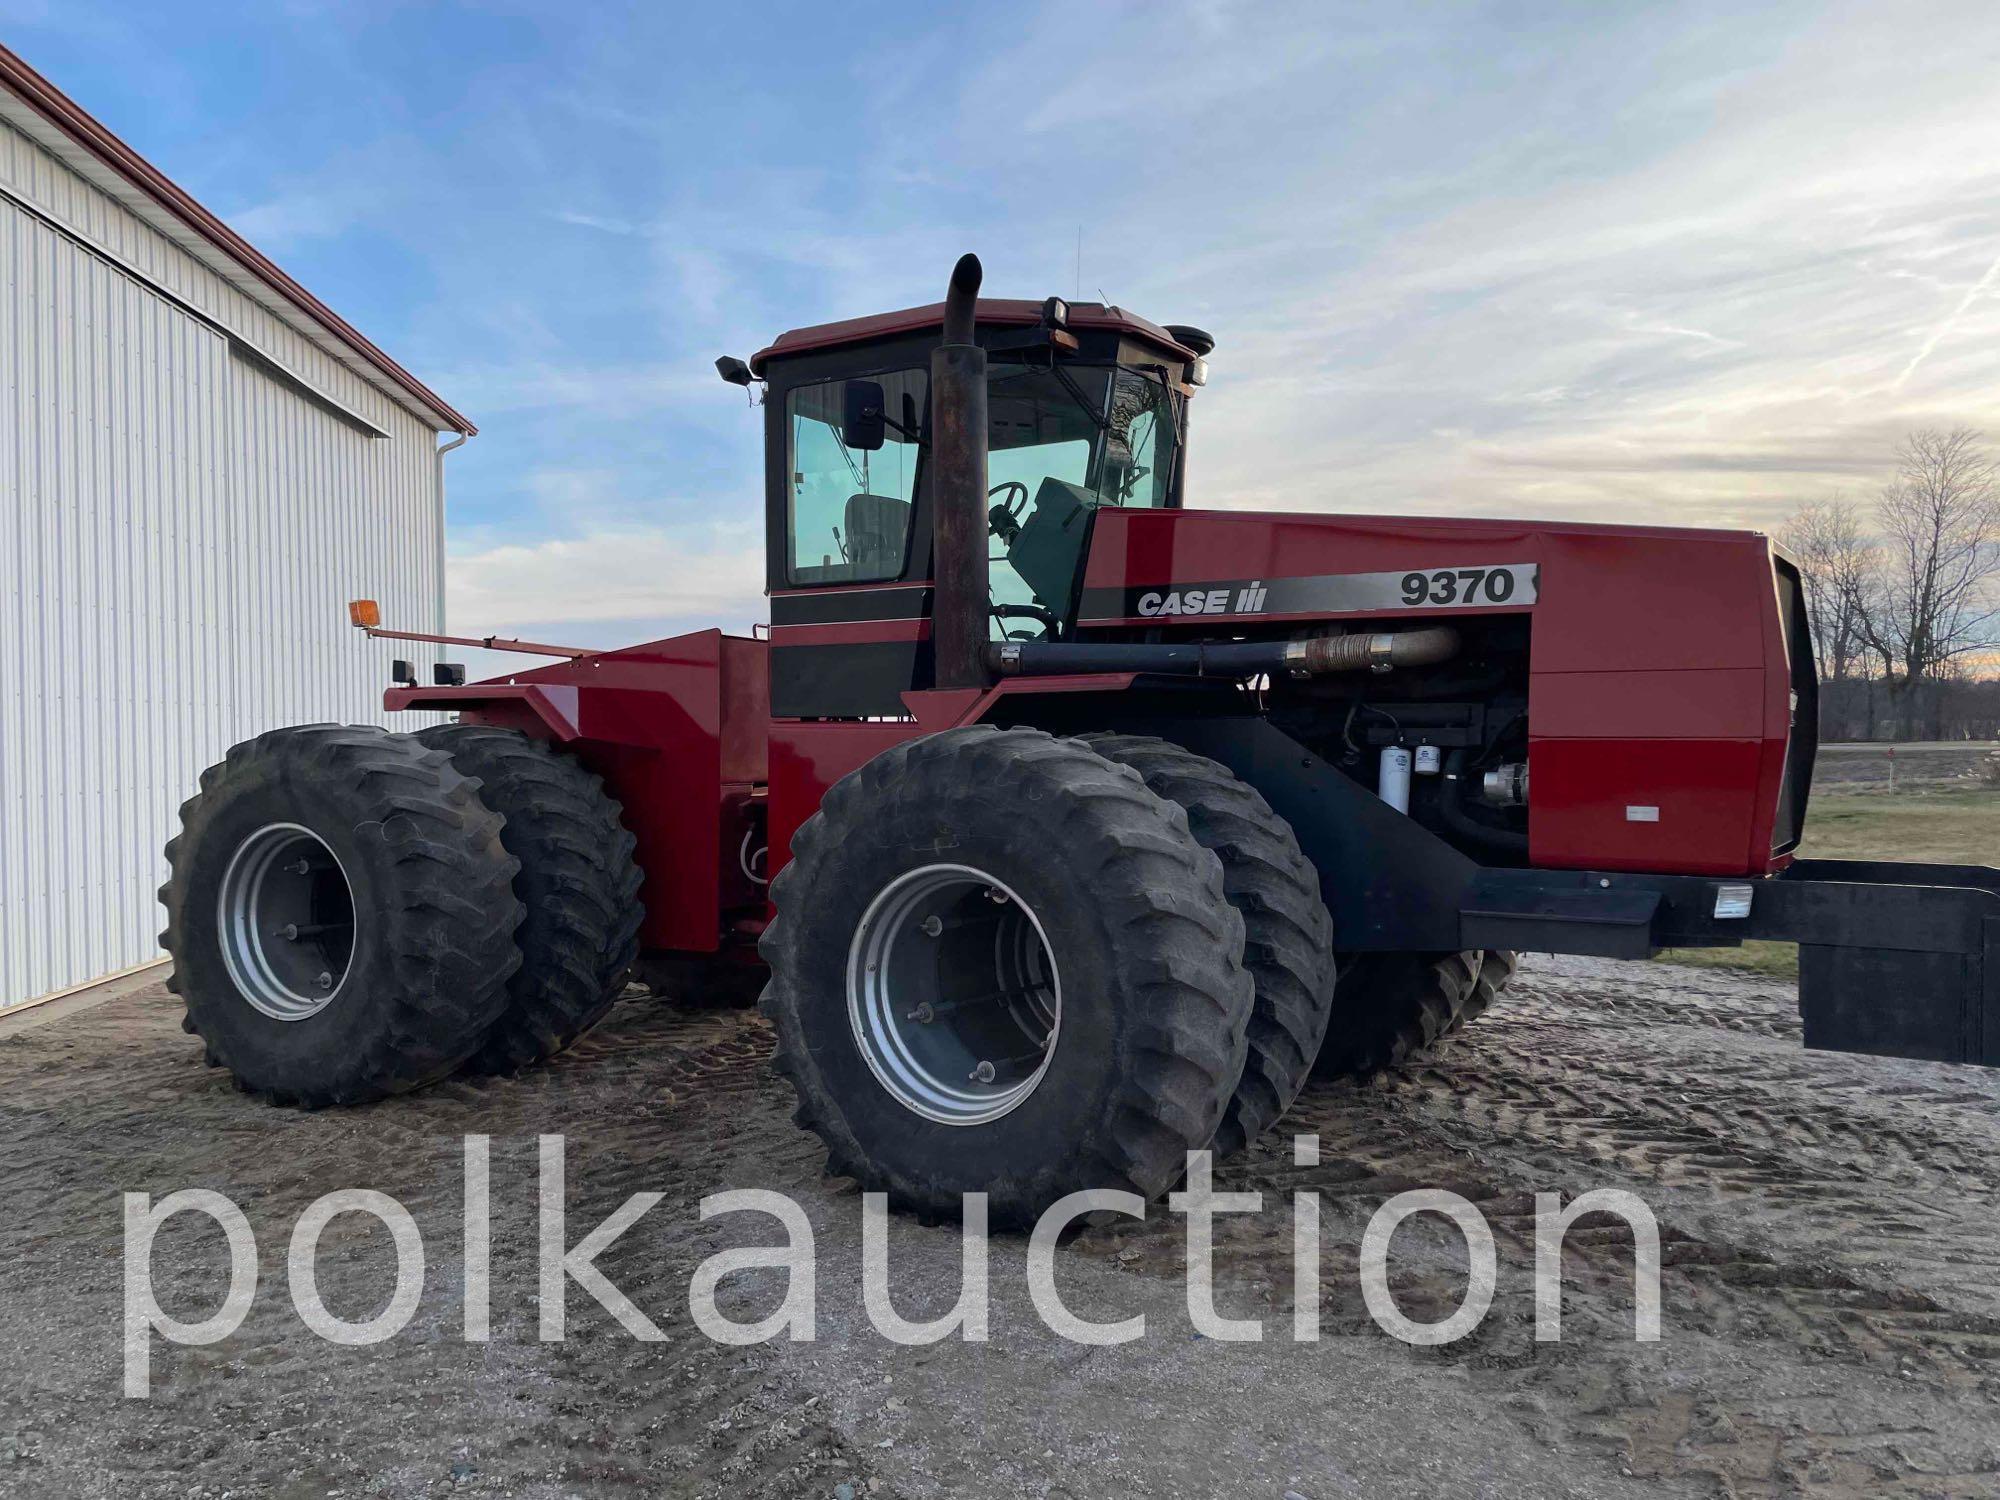 Case IH 9370 Tractor